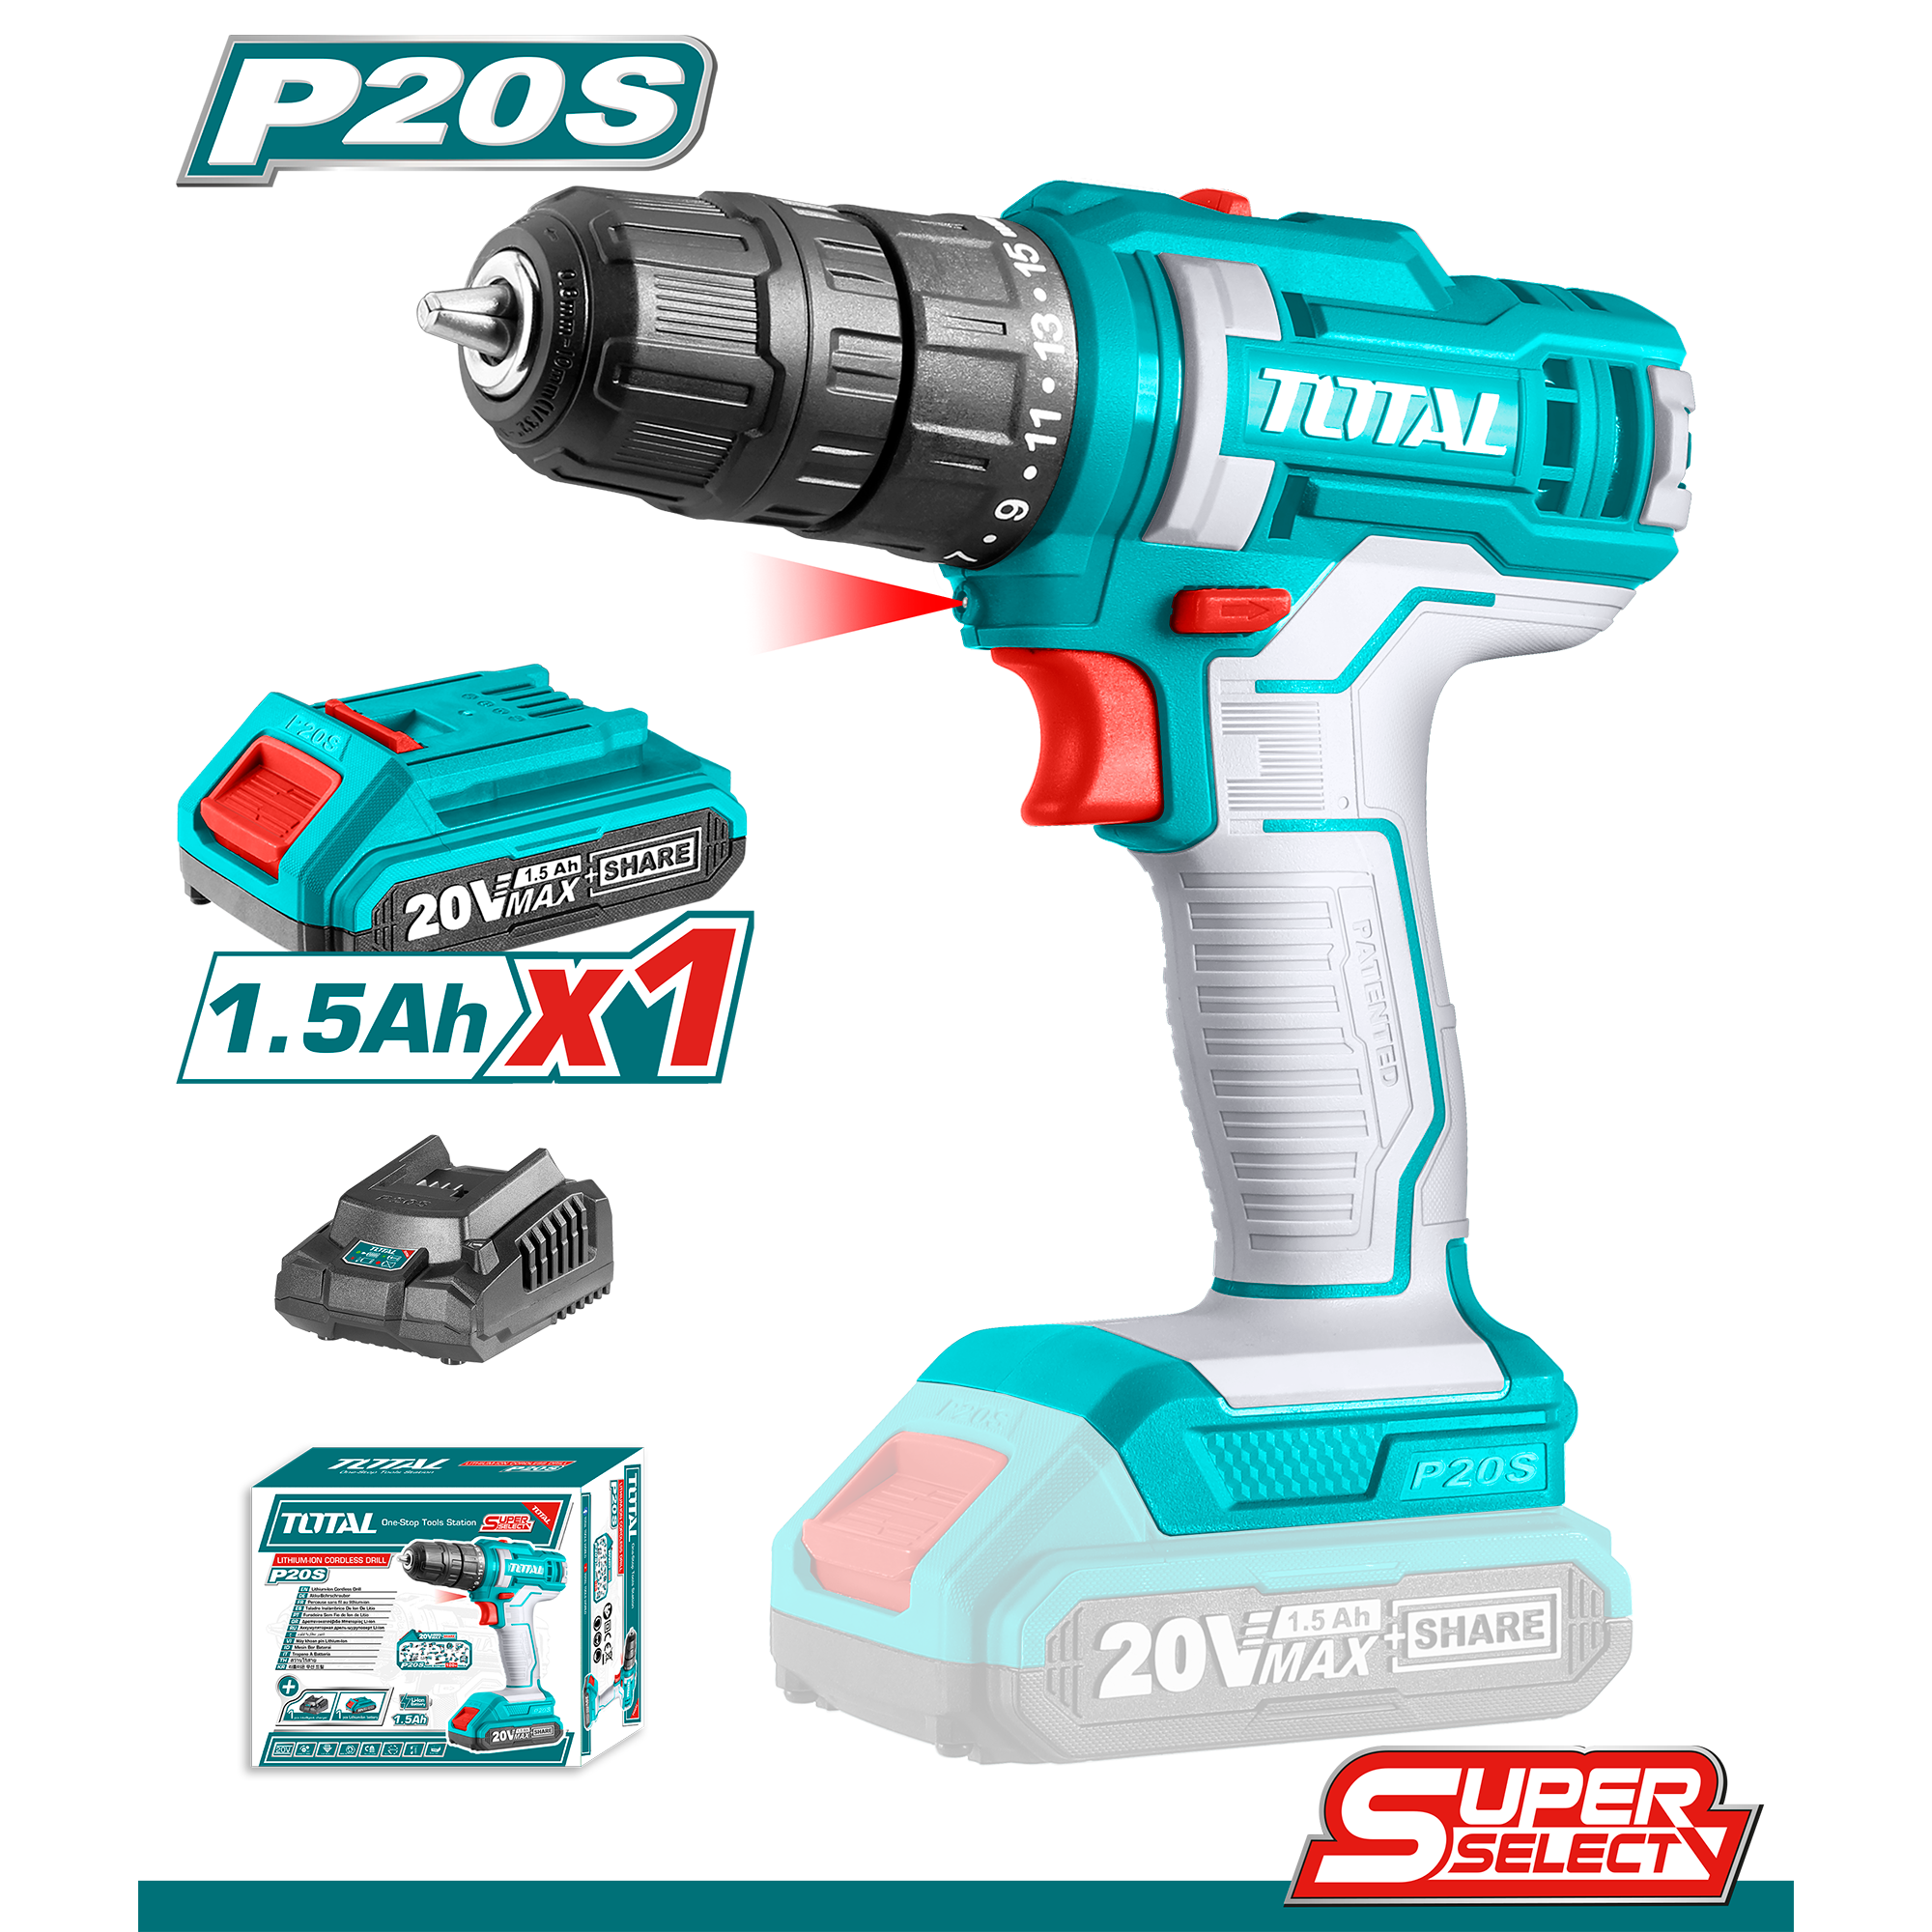 TOTAL TOOLS LITHIUM-ION CORDLESS DRILL TOTAL TOOLS NAMIBIA